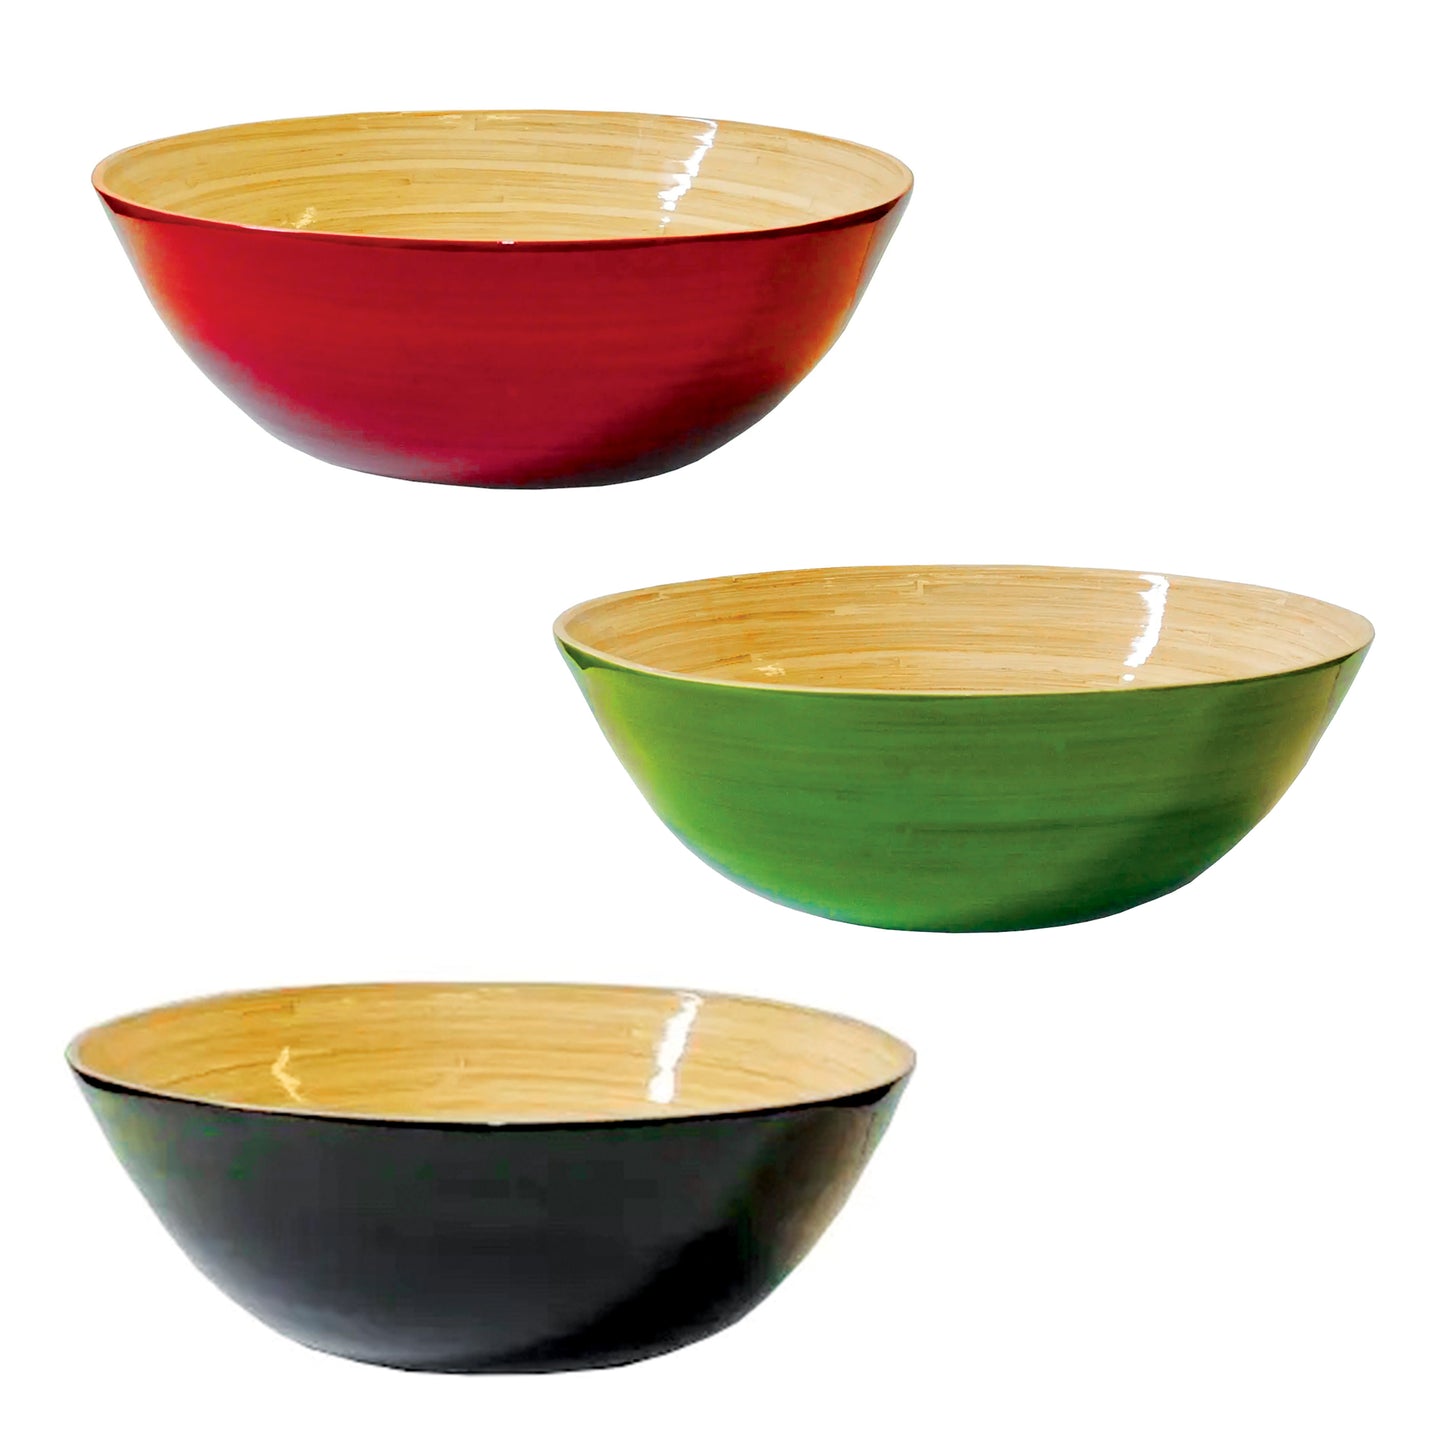 Lacquered Bamboo Bowl, 15.7" D x 5.5" H